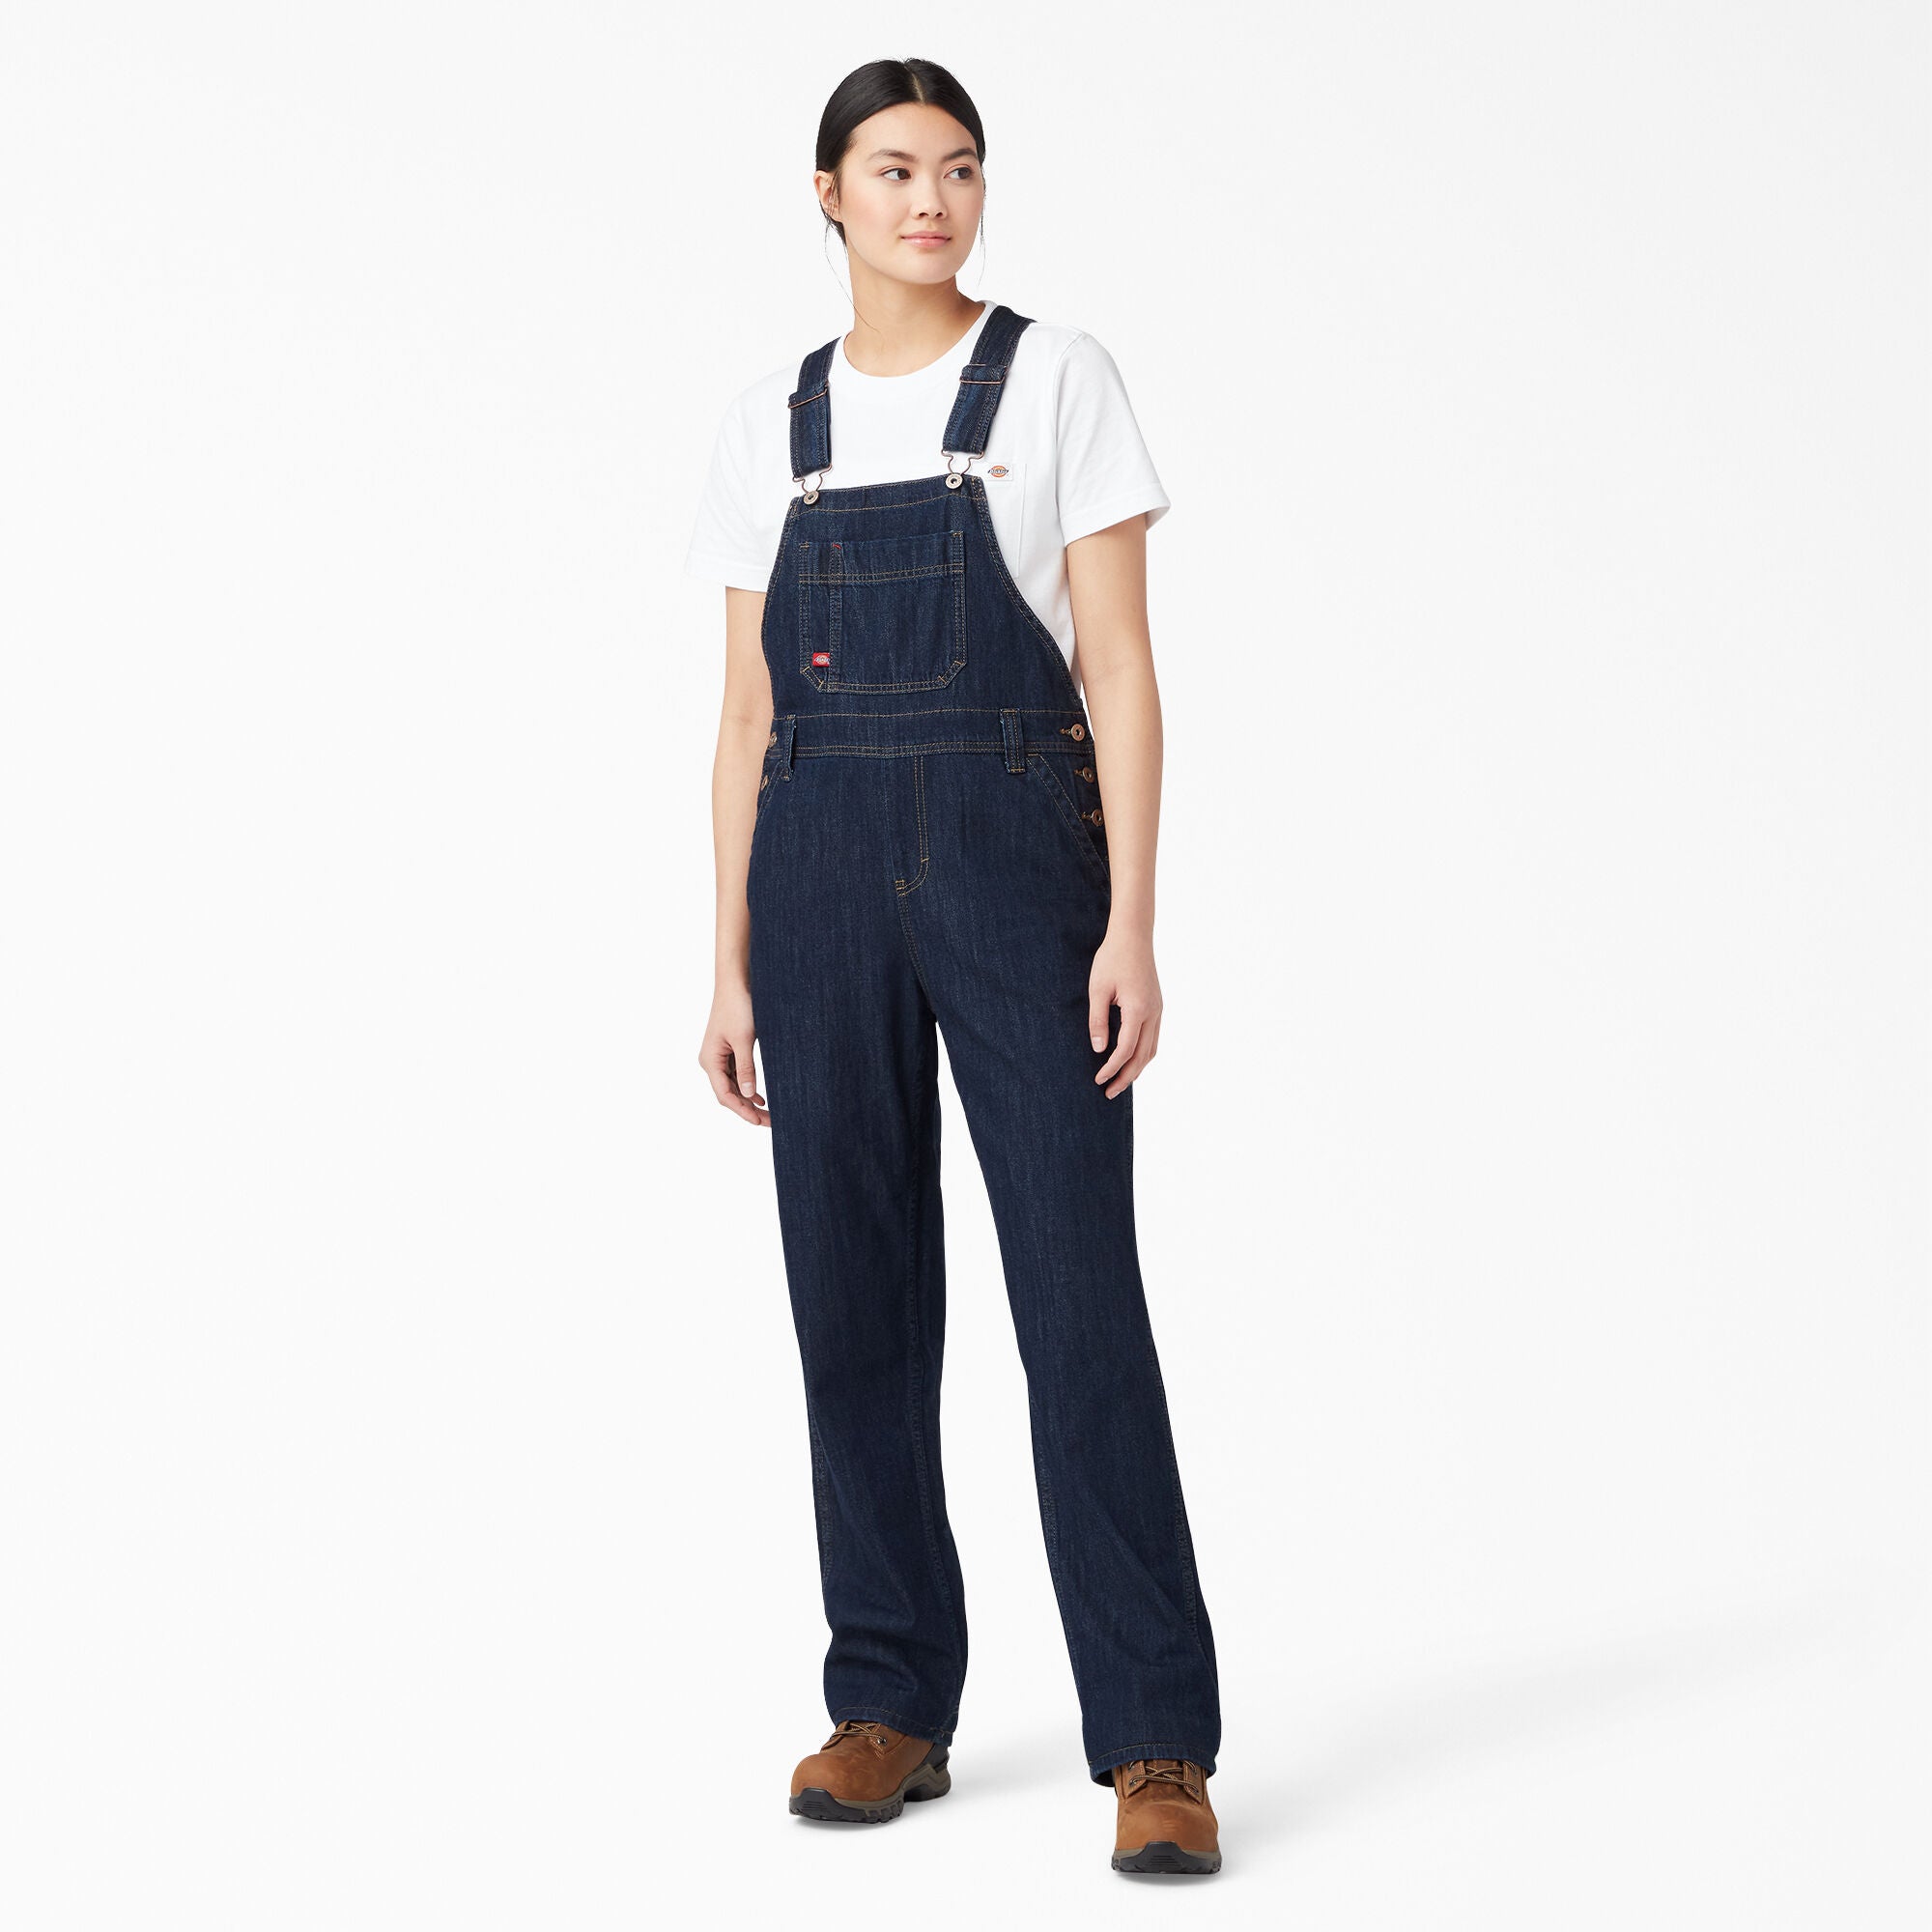 Dickies Women's Relaxed Fit Bib Overall - Work World - Workwear, Work Boots, Safety Gear